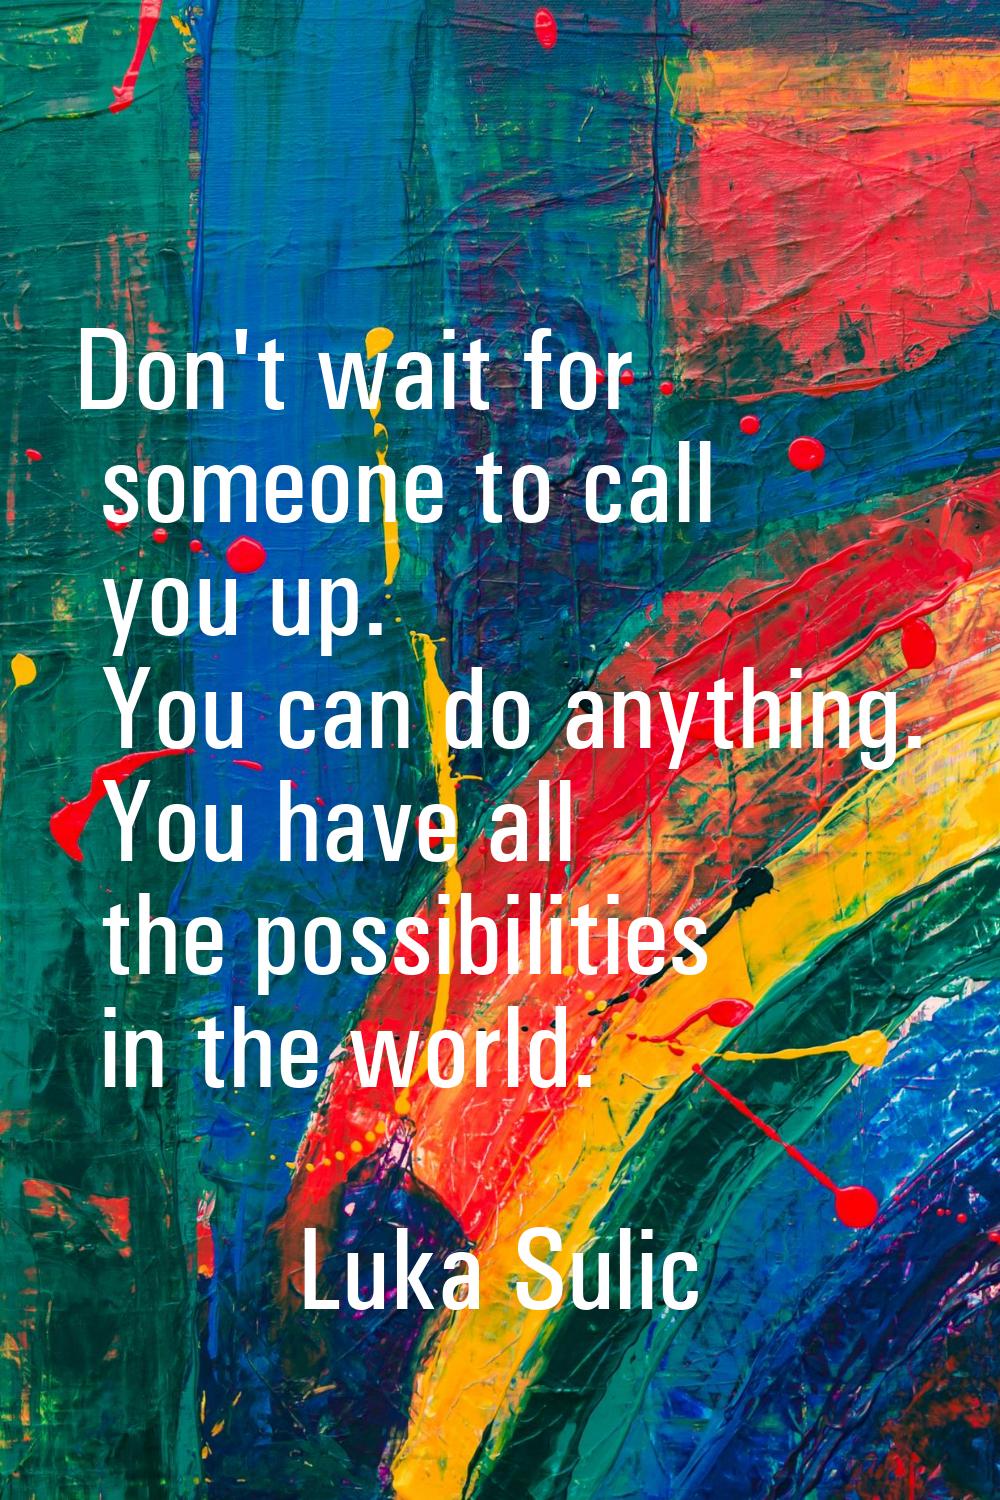 Don't wait for someone to call you up. You can do anything. You have all the possibilities in the w